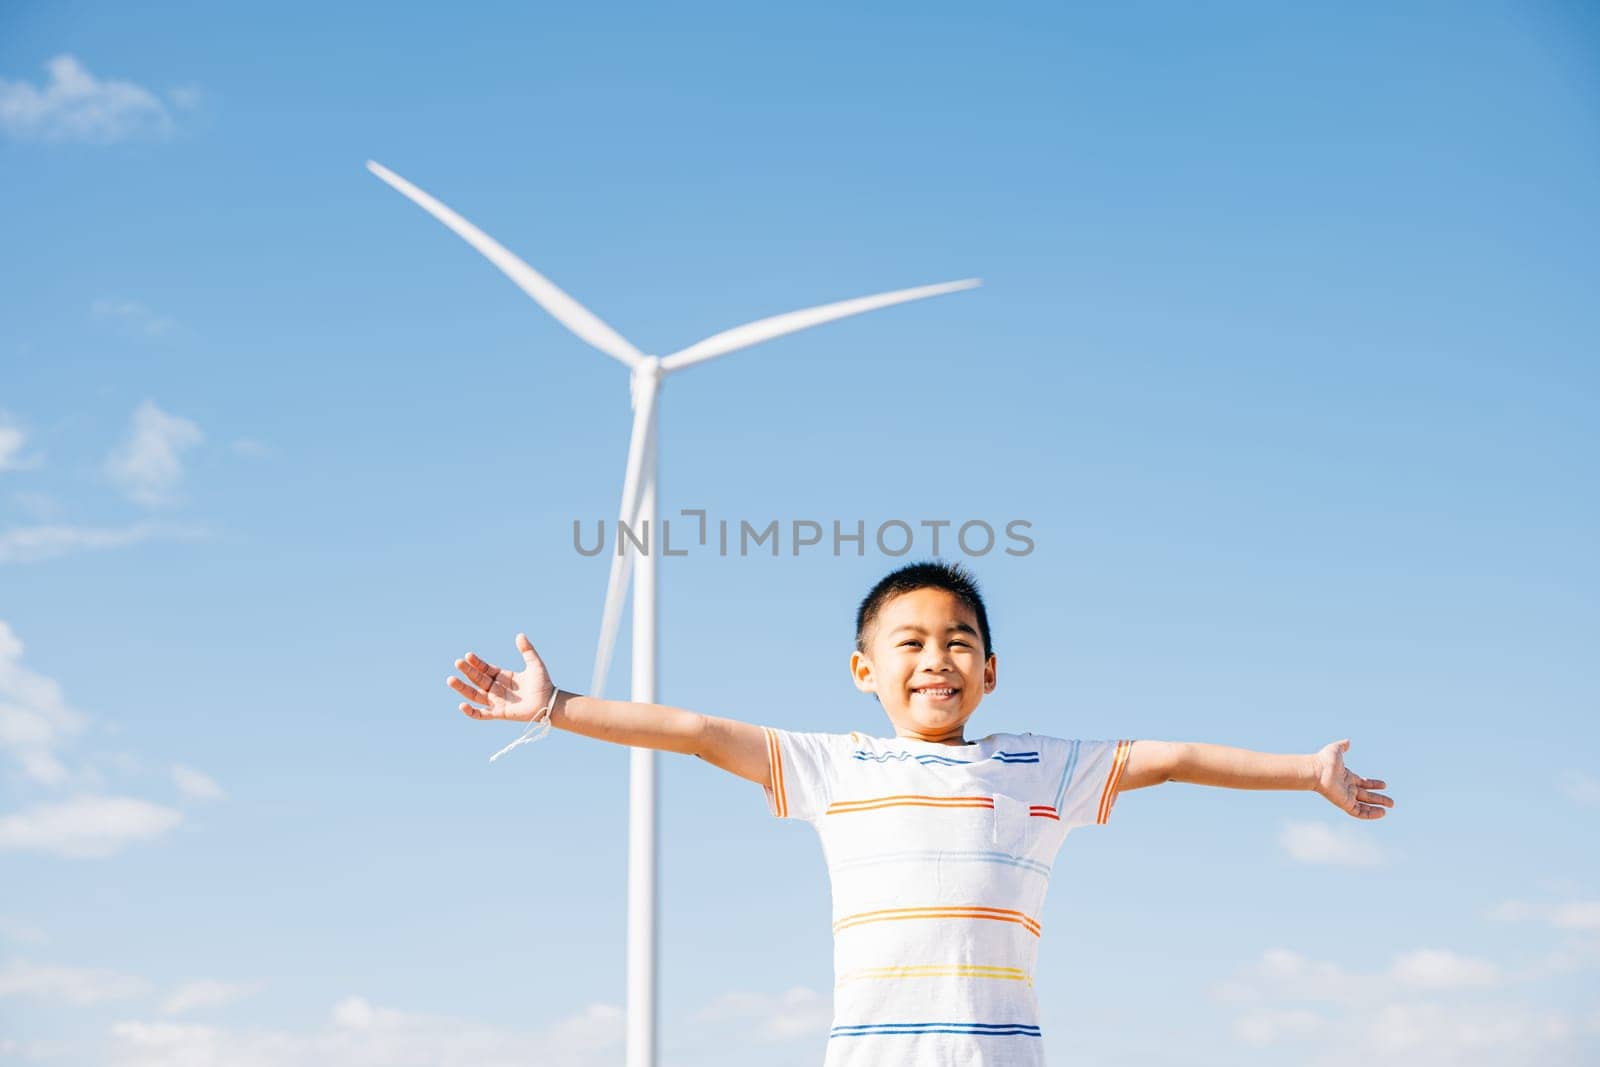 A happy boy in a wind farm's environment. Family joy and carefree moments near turbines celebrating nature's escape and clean energy. The child's smiling face amid windmill technology.